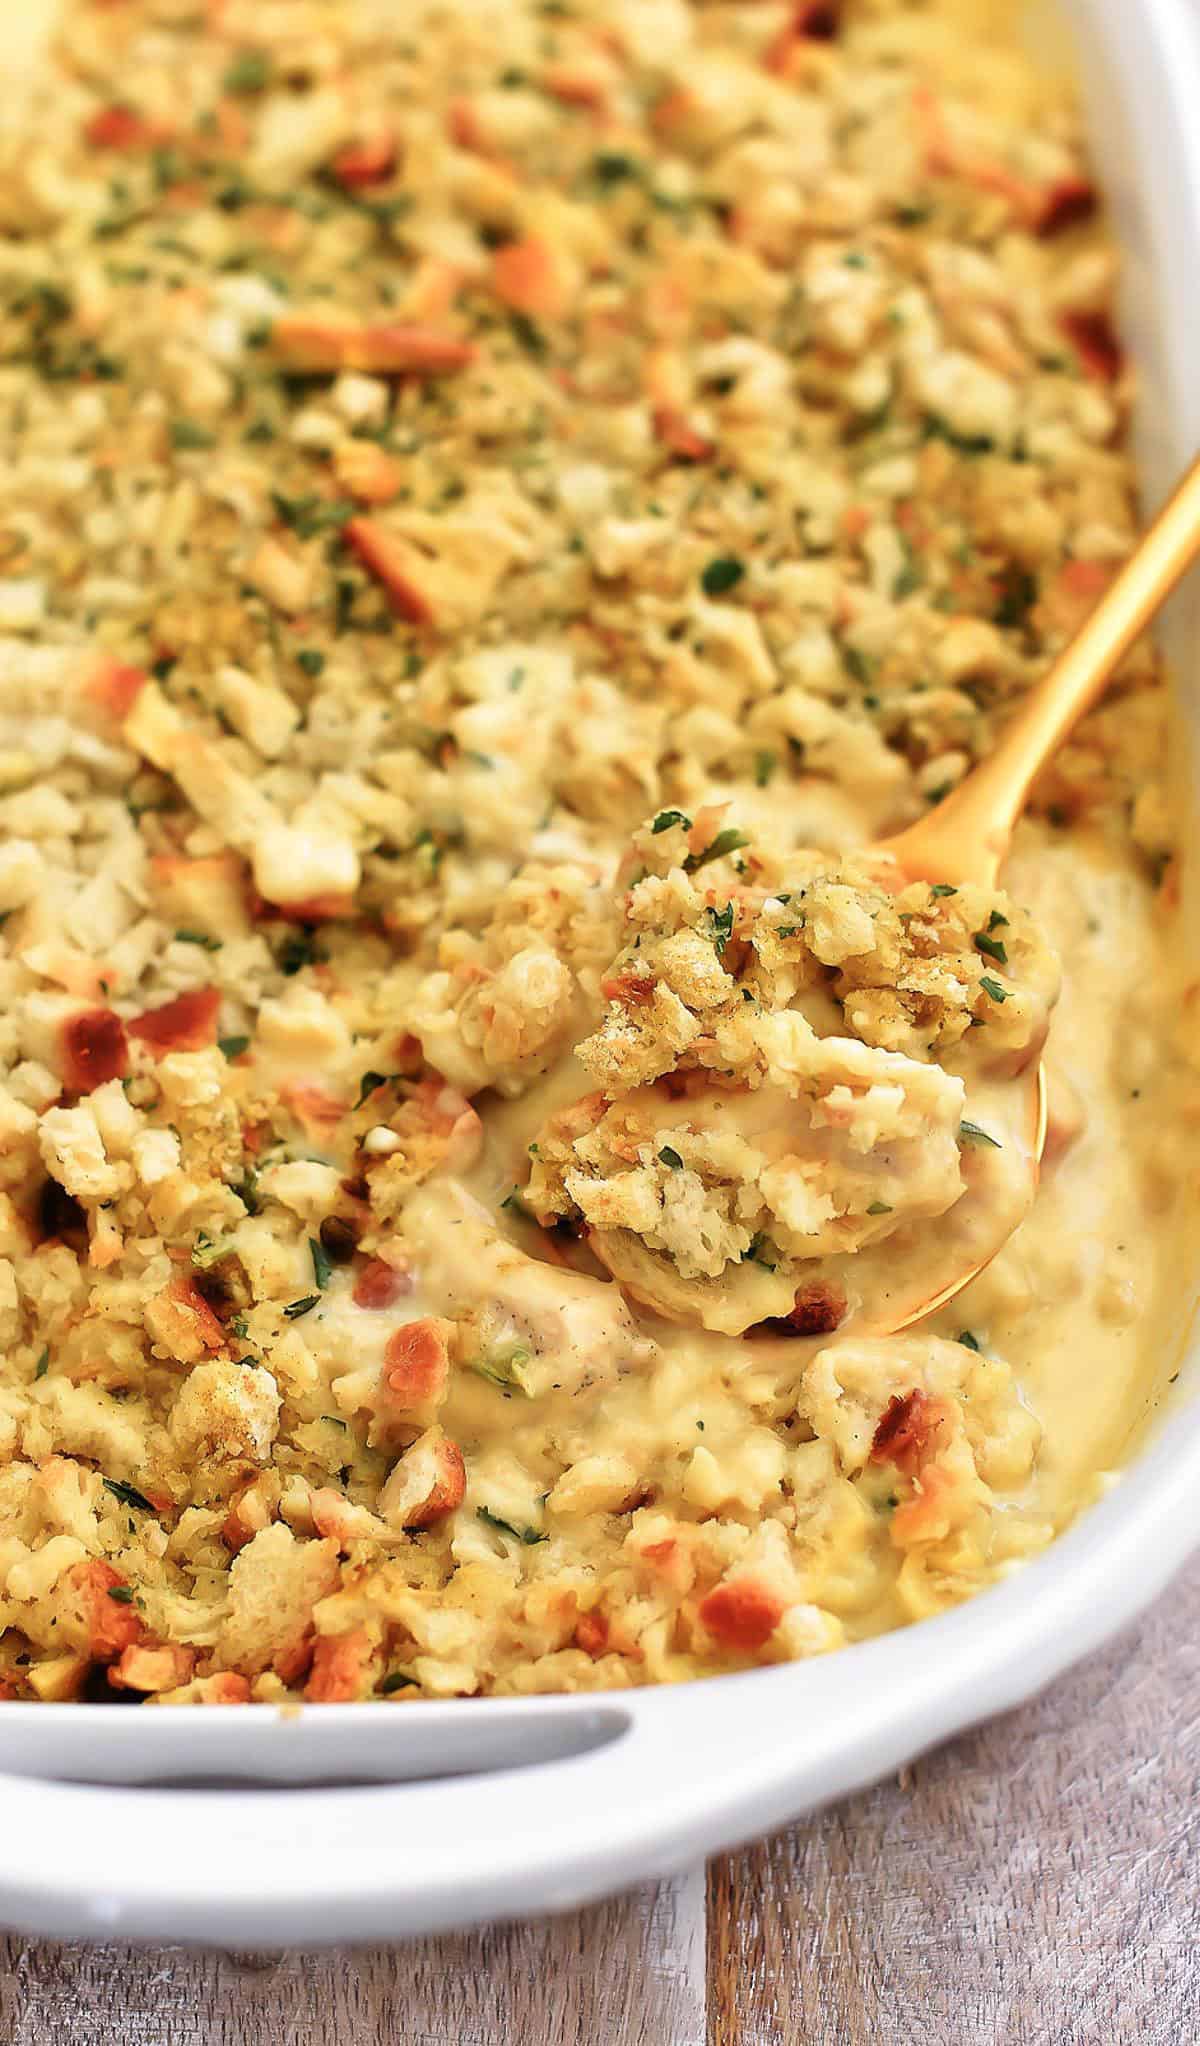  This casserole is the ultimate comfort food that hits all the right spots.